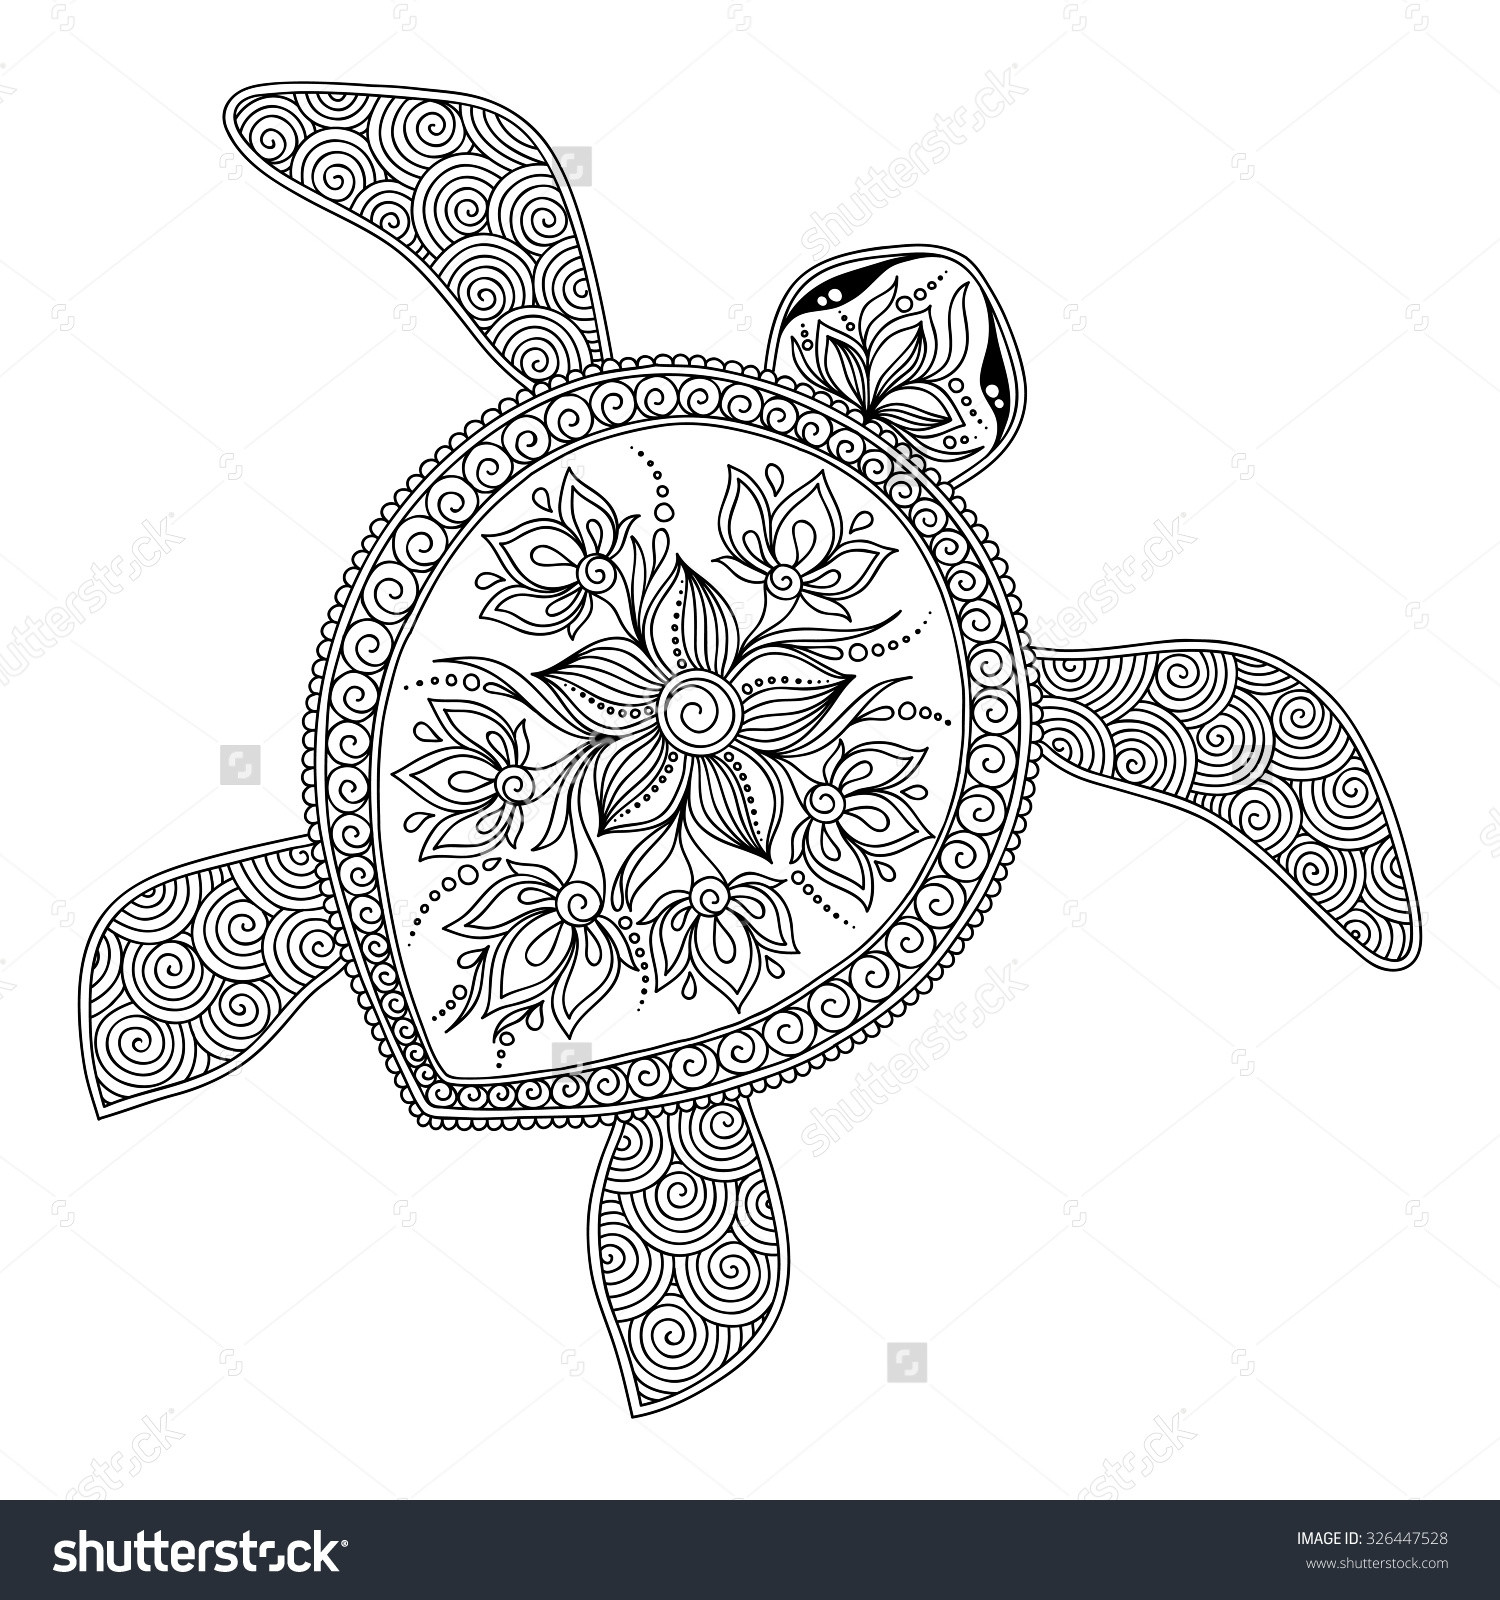 Sea Turtle Coloring Pages For Adults
 Sea Turtle Adult Coloring Pages Free Coloring For Kids 2019